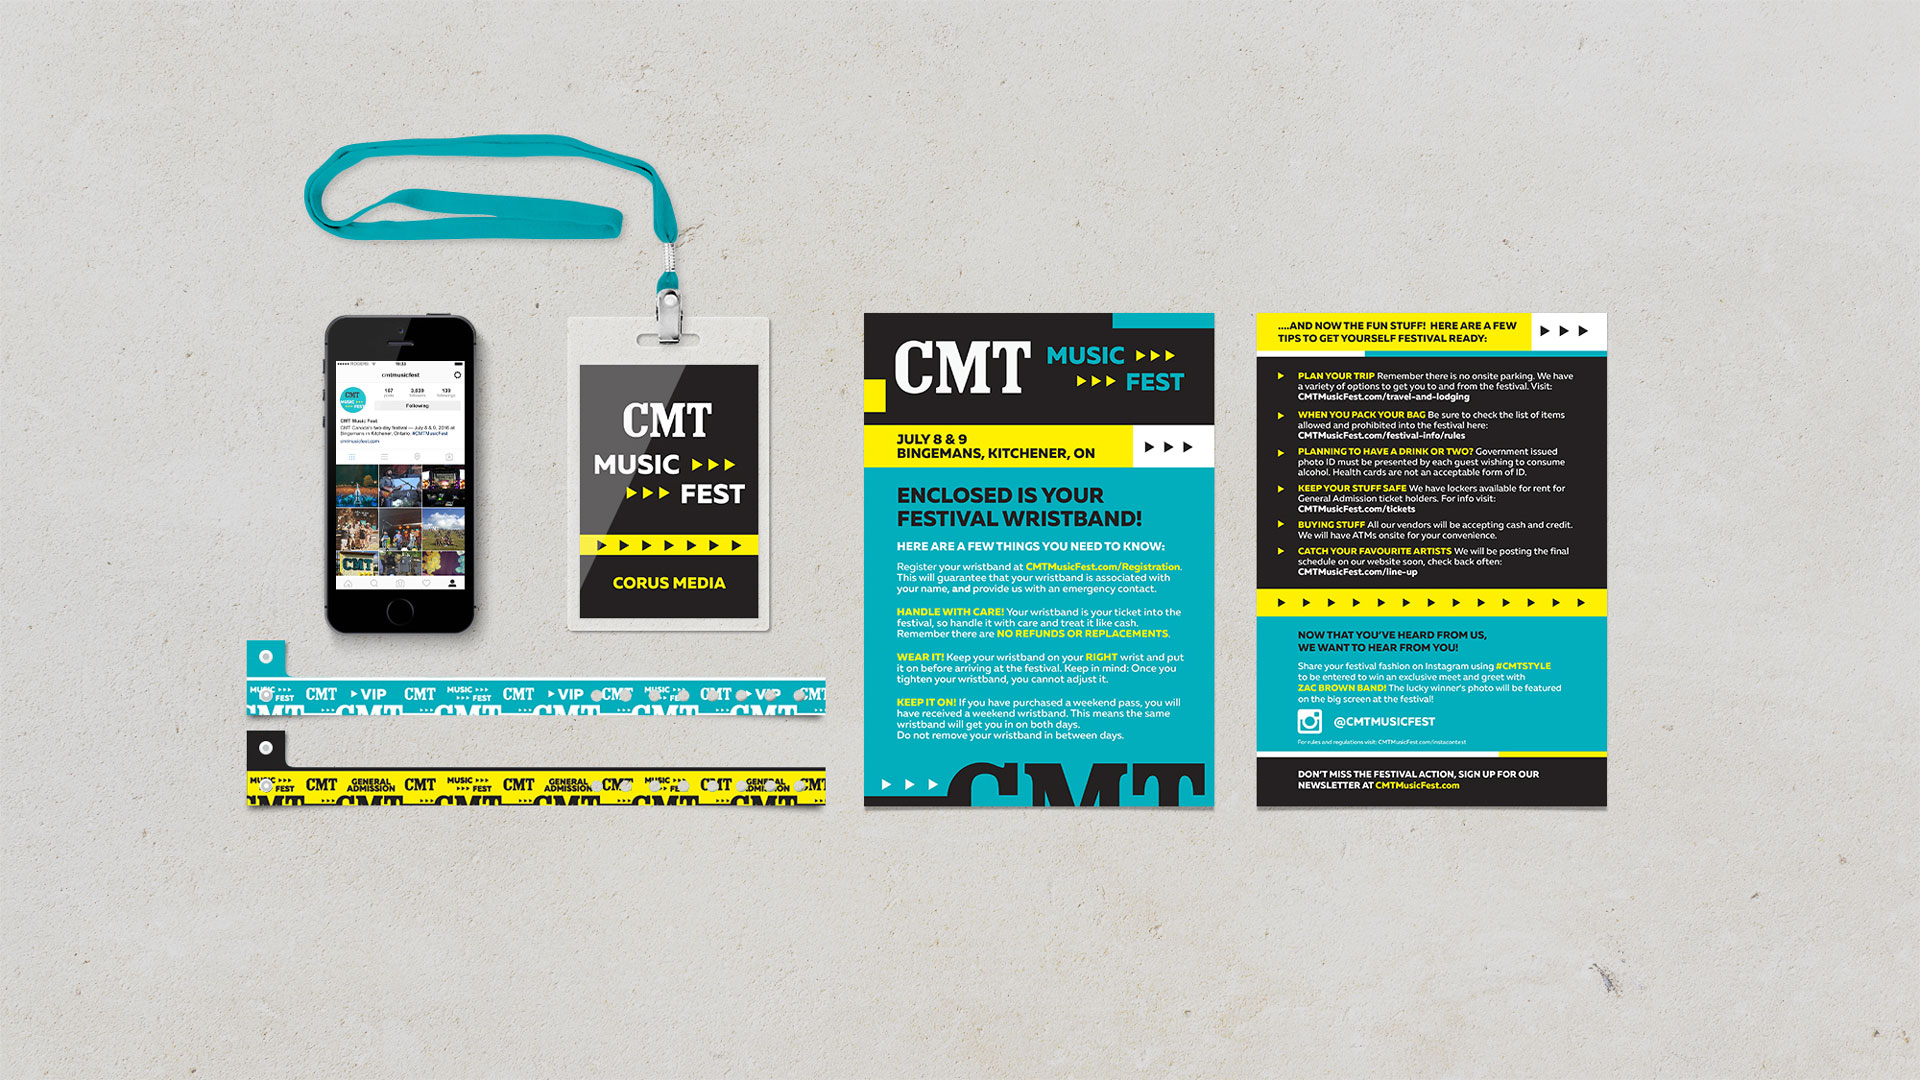 Print Material for the CMT Music Fest